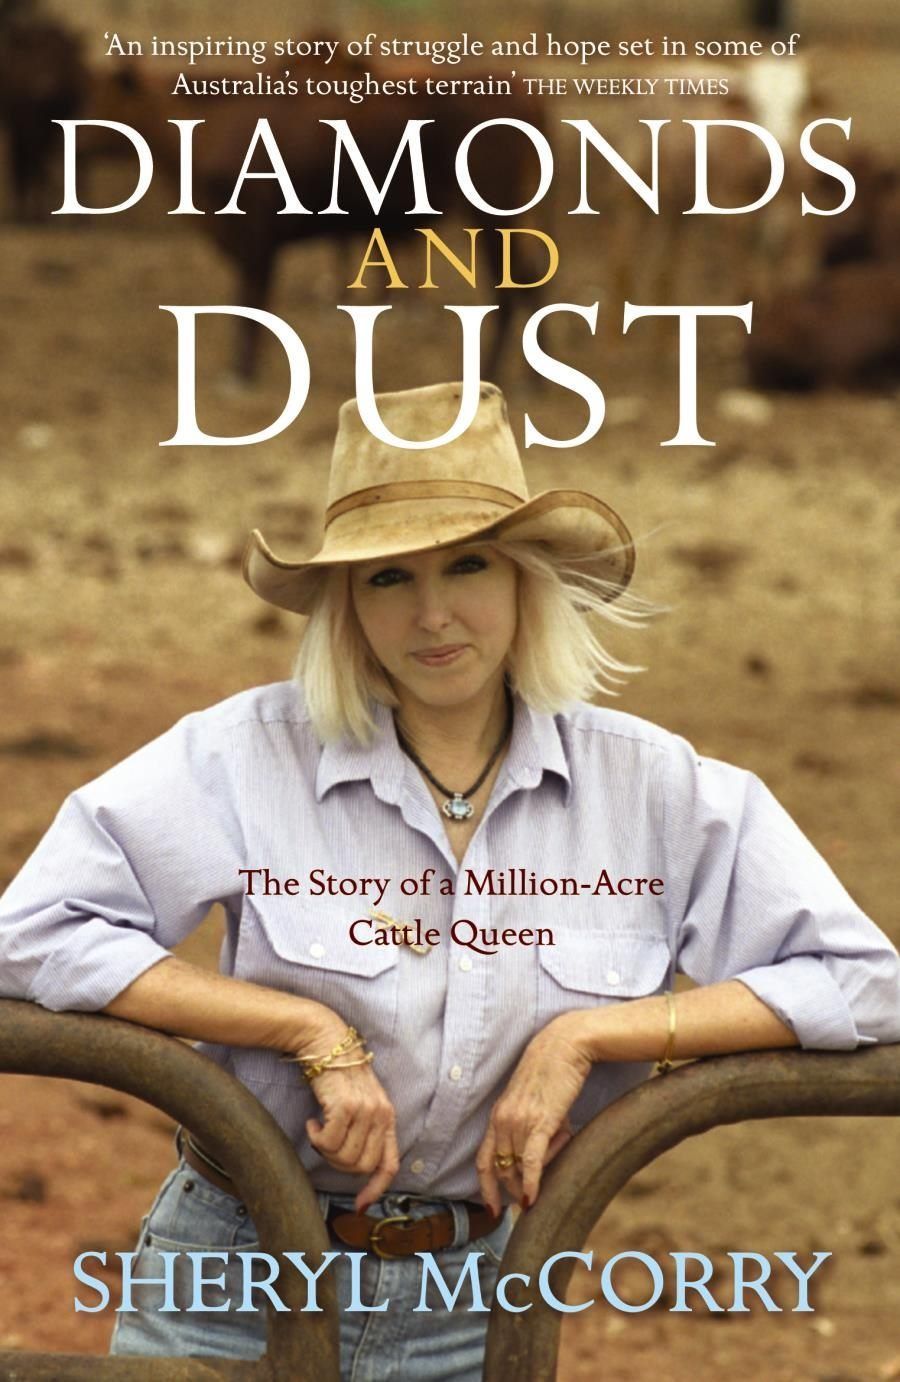 DIAMONDS AND DUST: The Story of a Million-Acre Cattle Queen